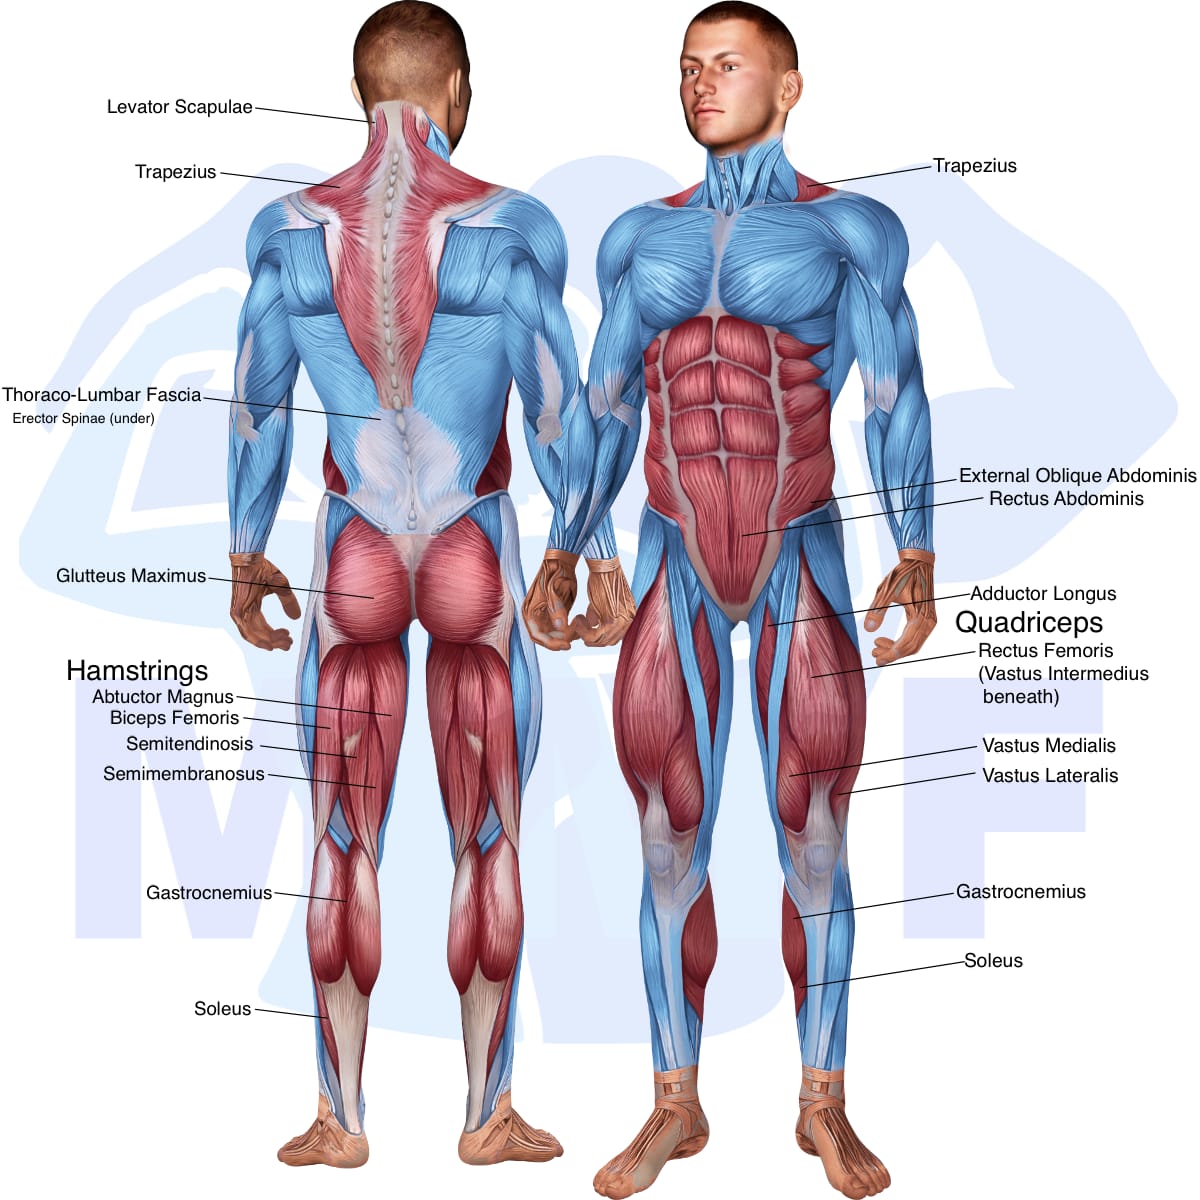 Image of the skeletal muscular system with the muscles used in the sled leg press exercise highlighted in red and the rest in blue.